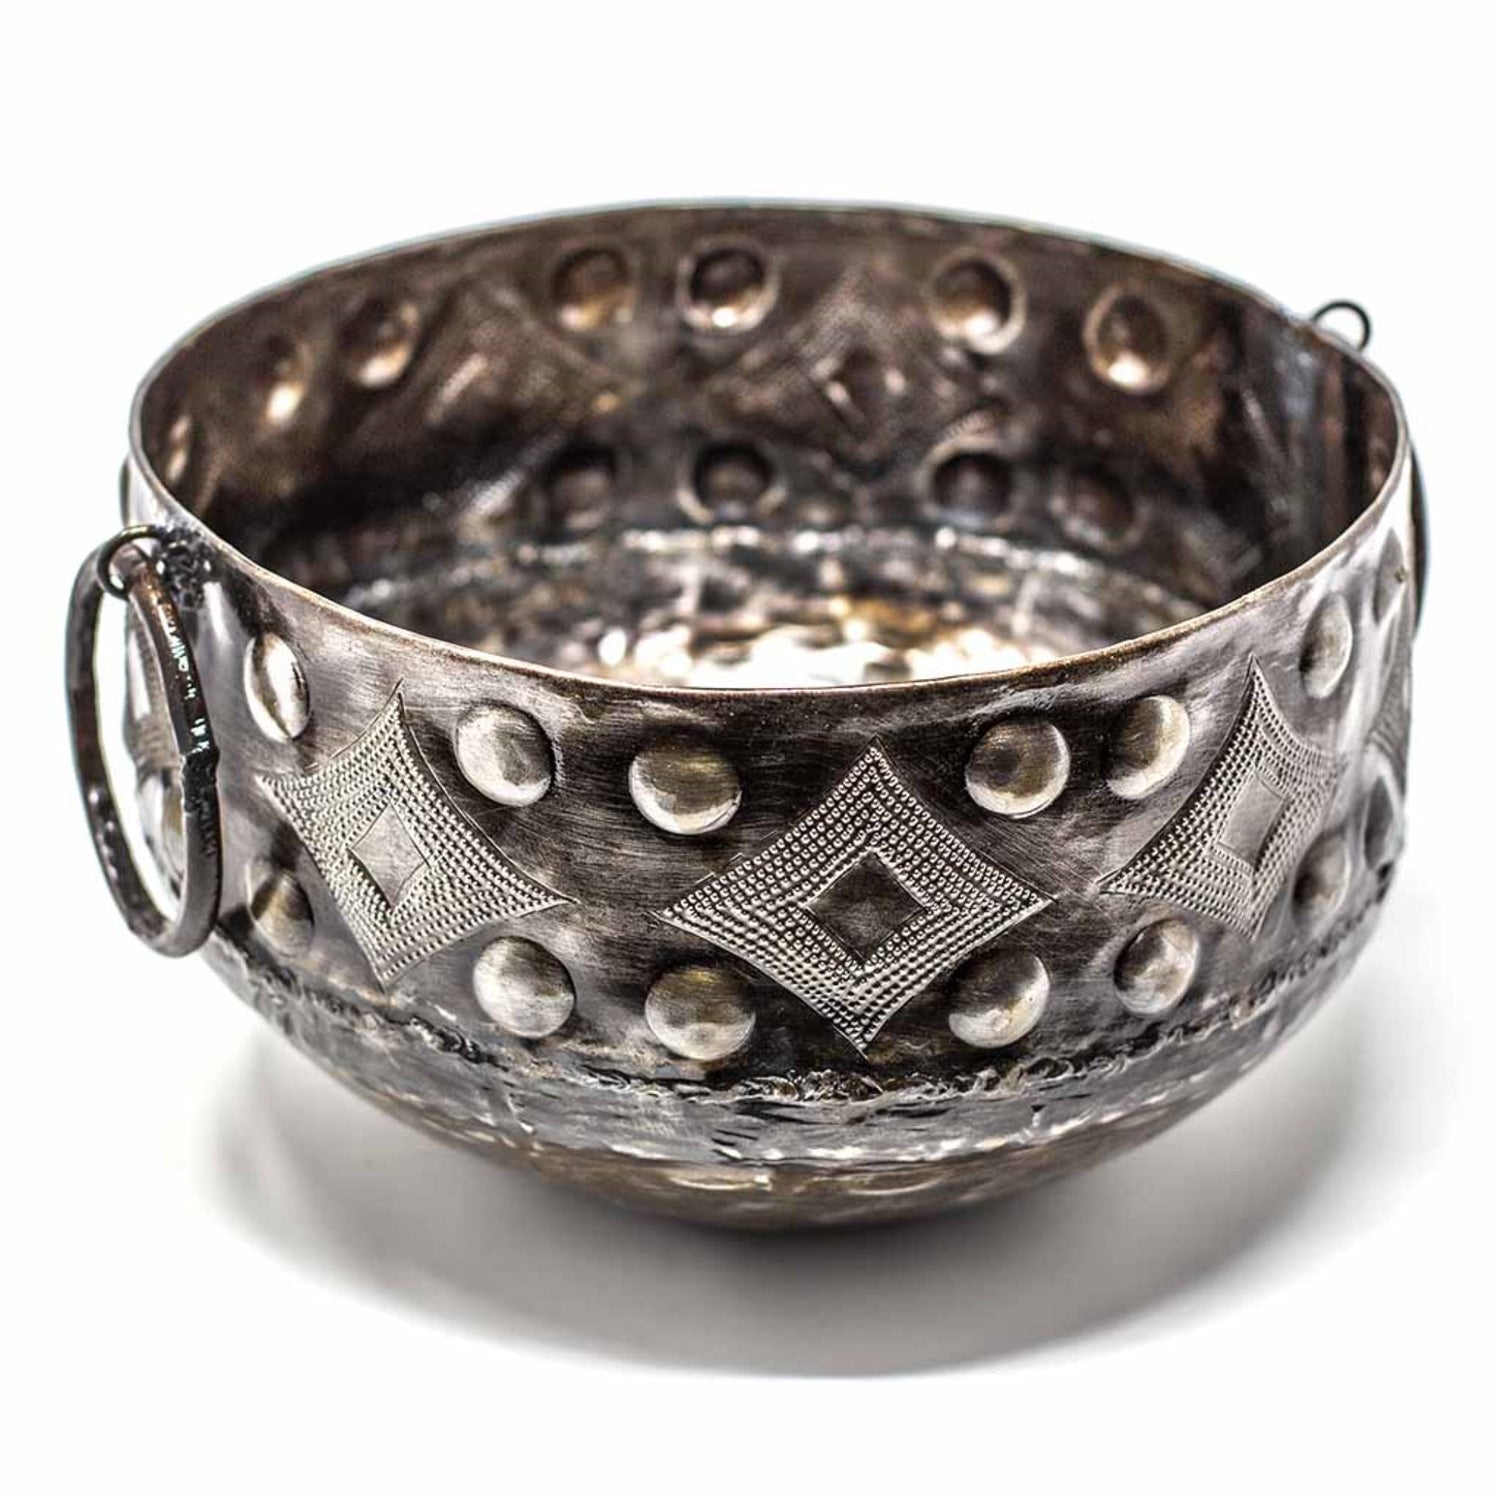 large-hammered-metal-container-with-round-handles-croix-des-bouquets